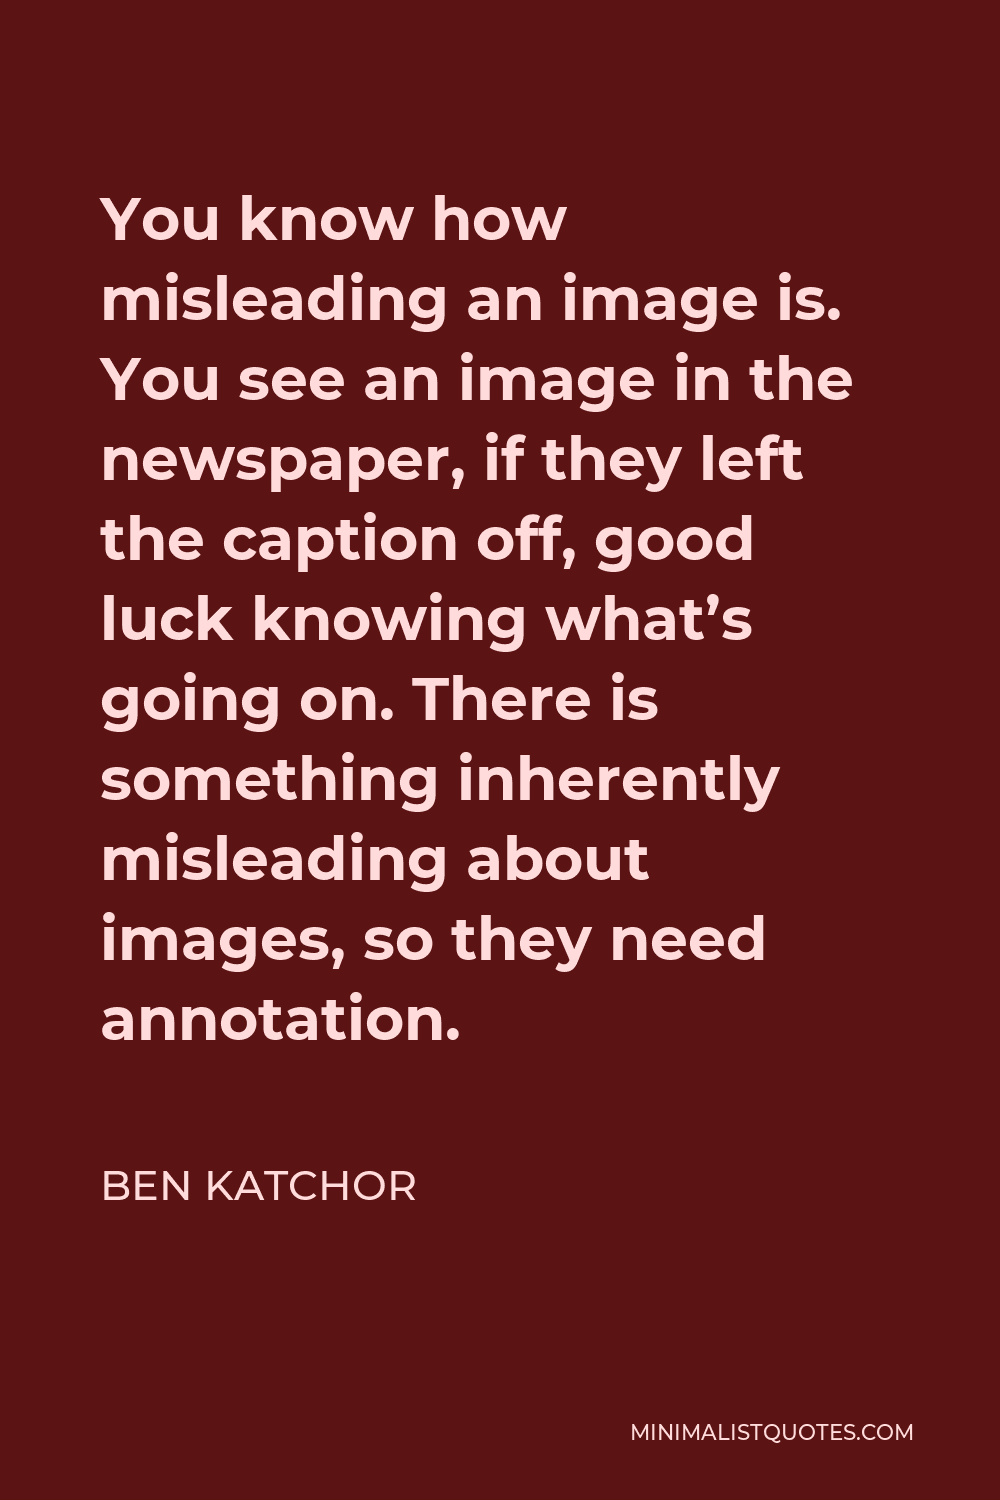 Ben Katchor Quote - You know how misleading an image is. You see an image in the newspaper, if they left the caption off, good luck knowing what’s going on. There is something inherently misleading about images, so they need annotation.